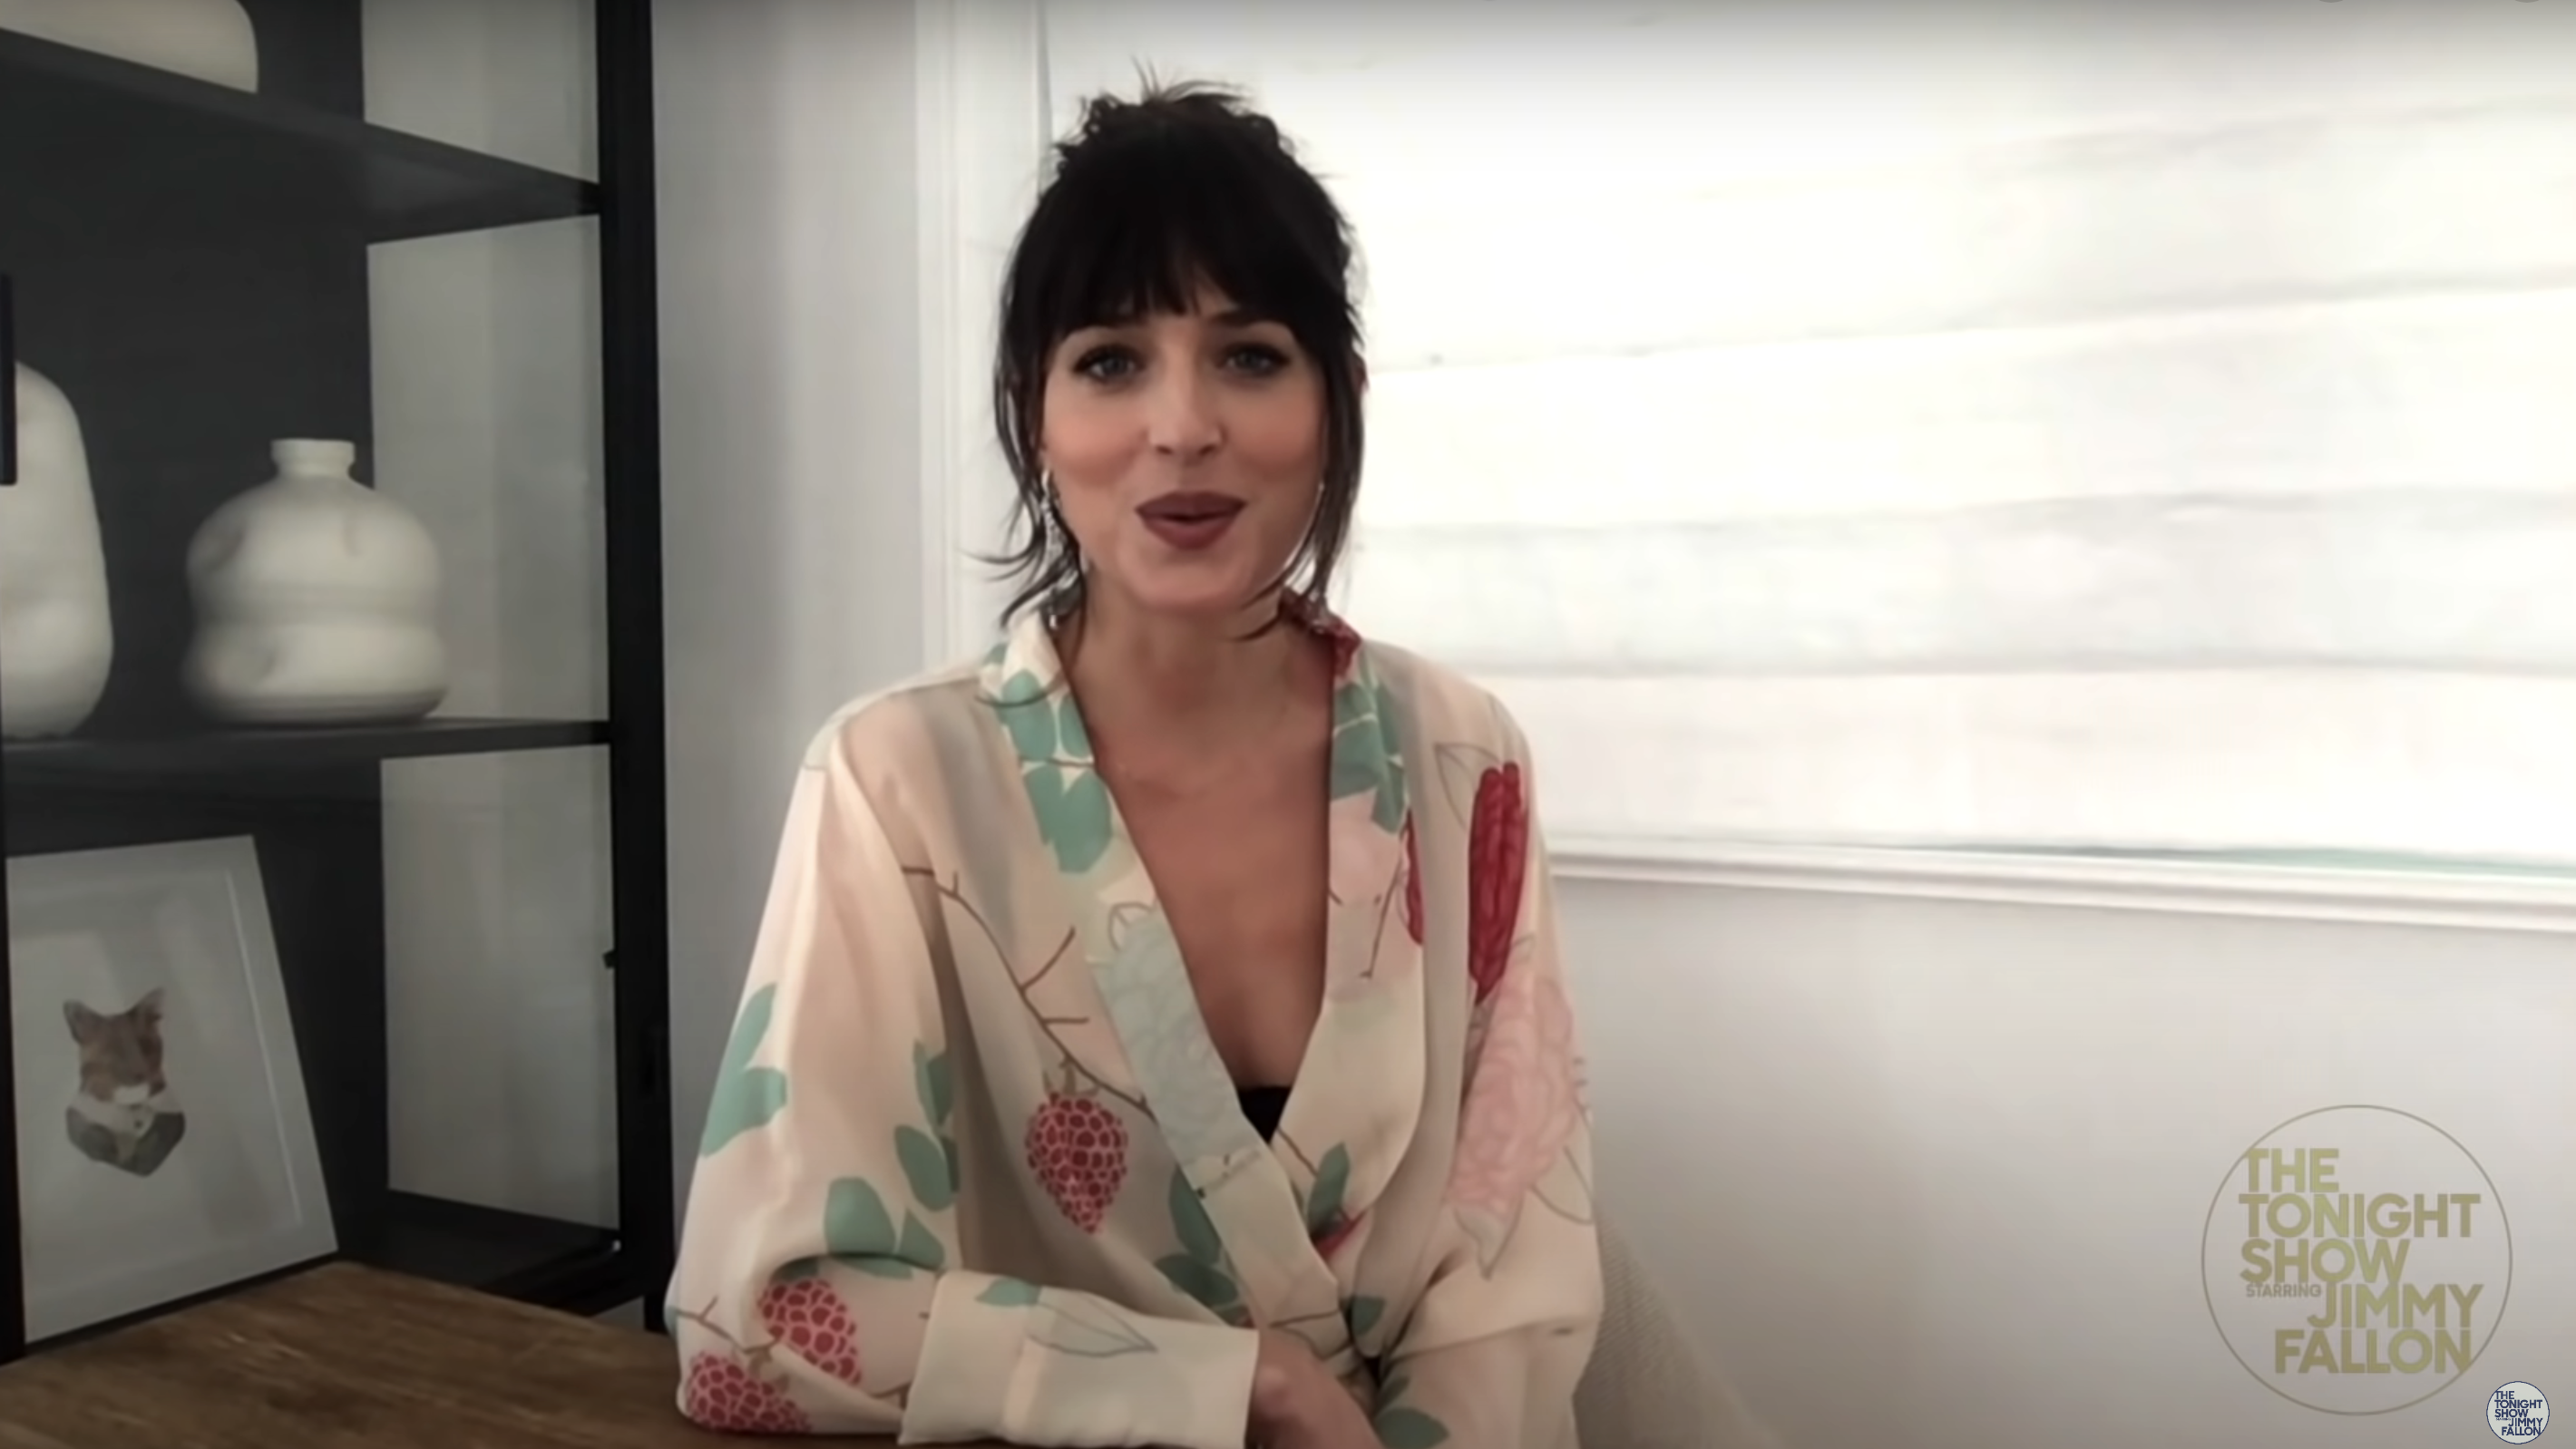 Dakota in patterned top on a video call with &quot;The Tonight Show Starring Jimmy Fallon&quot; logo visible